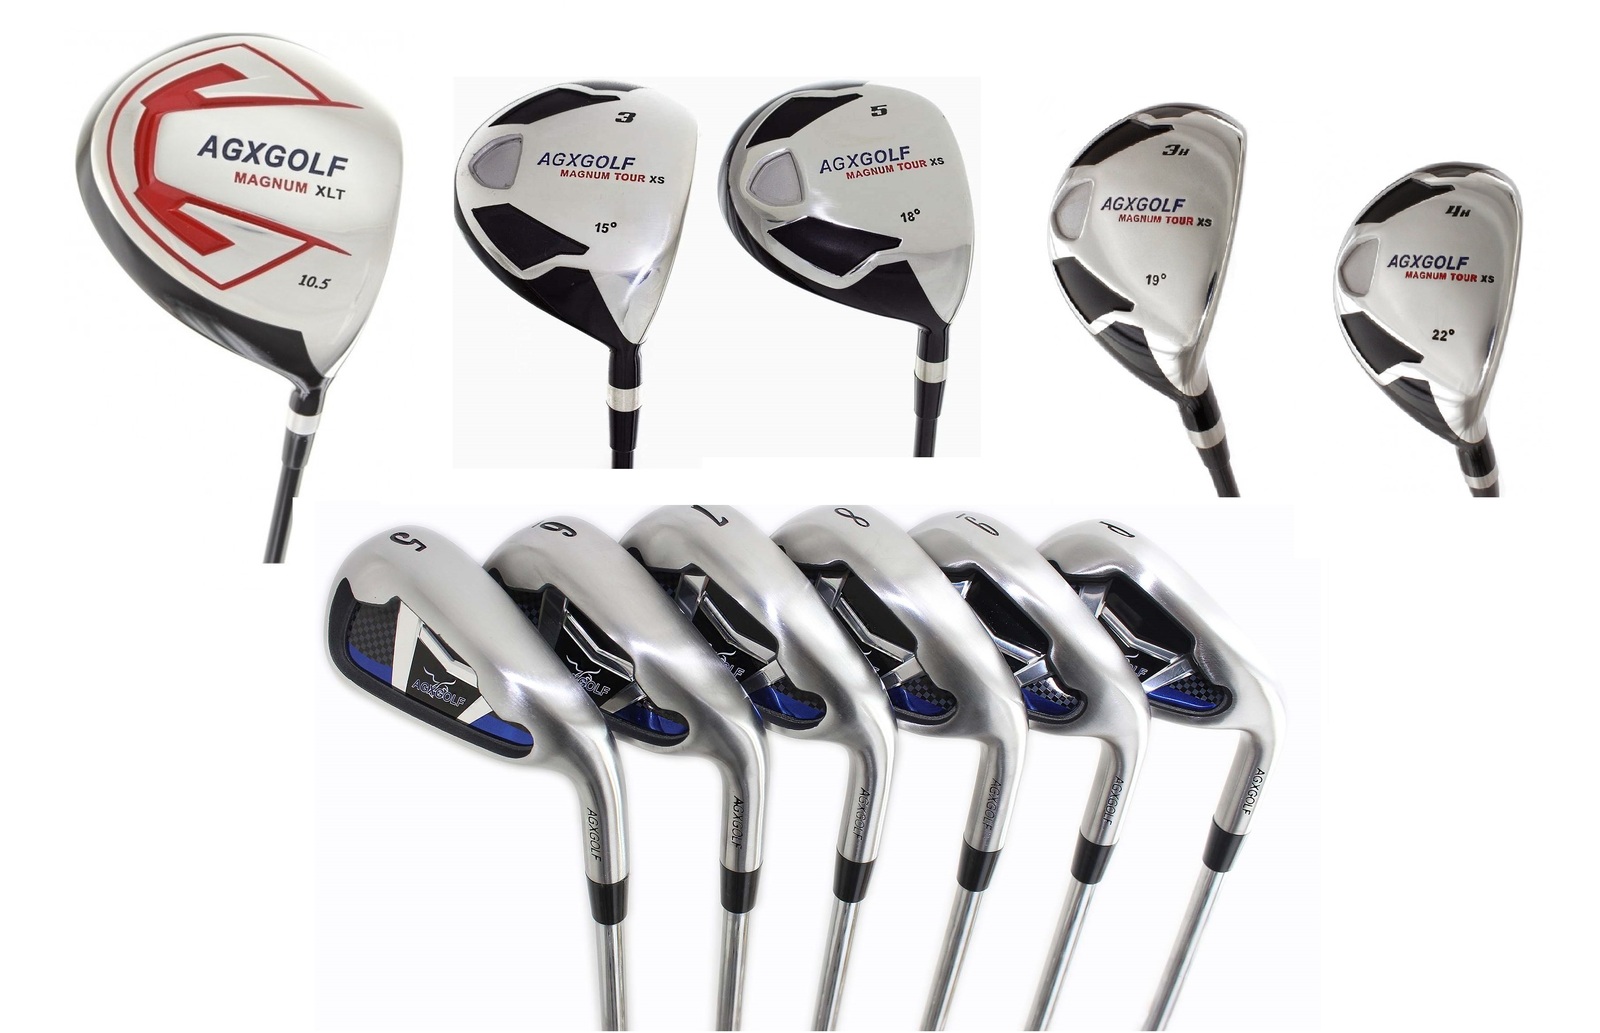 LADIES RIGHT HAND ALL GRAPHITE MAGNUM XS-TOUR EDITION 13 CLUB GOLF SET: ALL LENG - $299.95